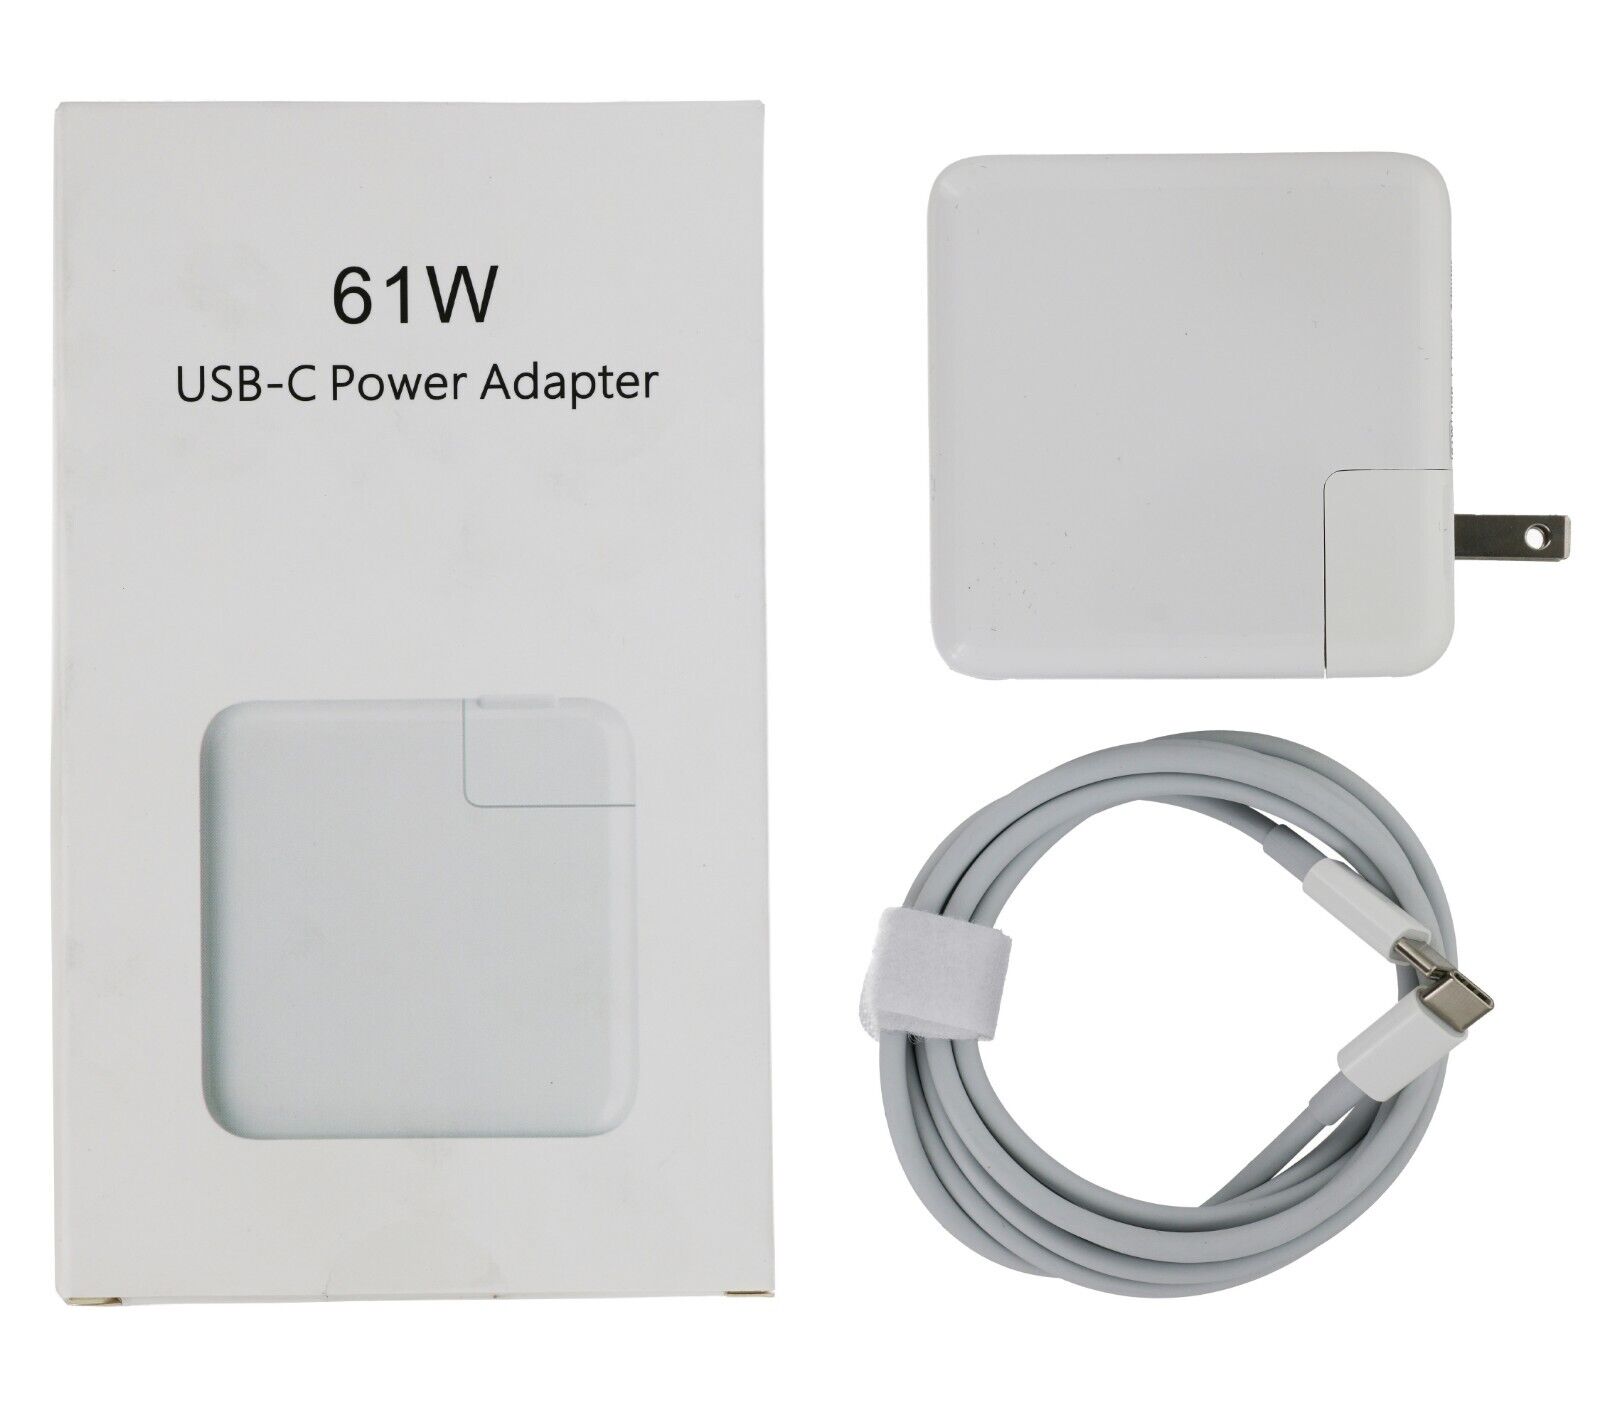 NEW 61W USB-C Power Adapter Charger for MacBook Pro 12